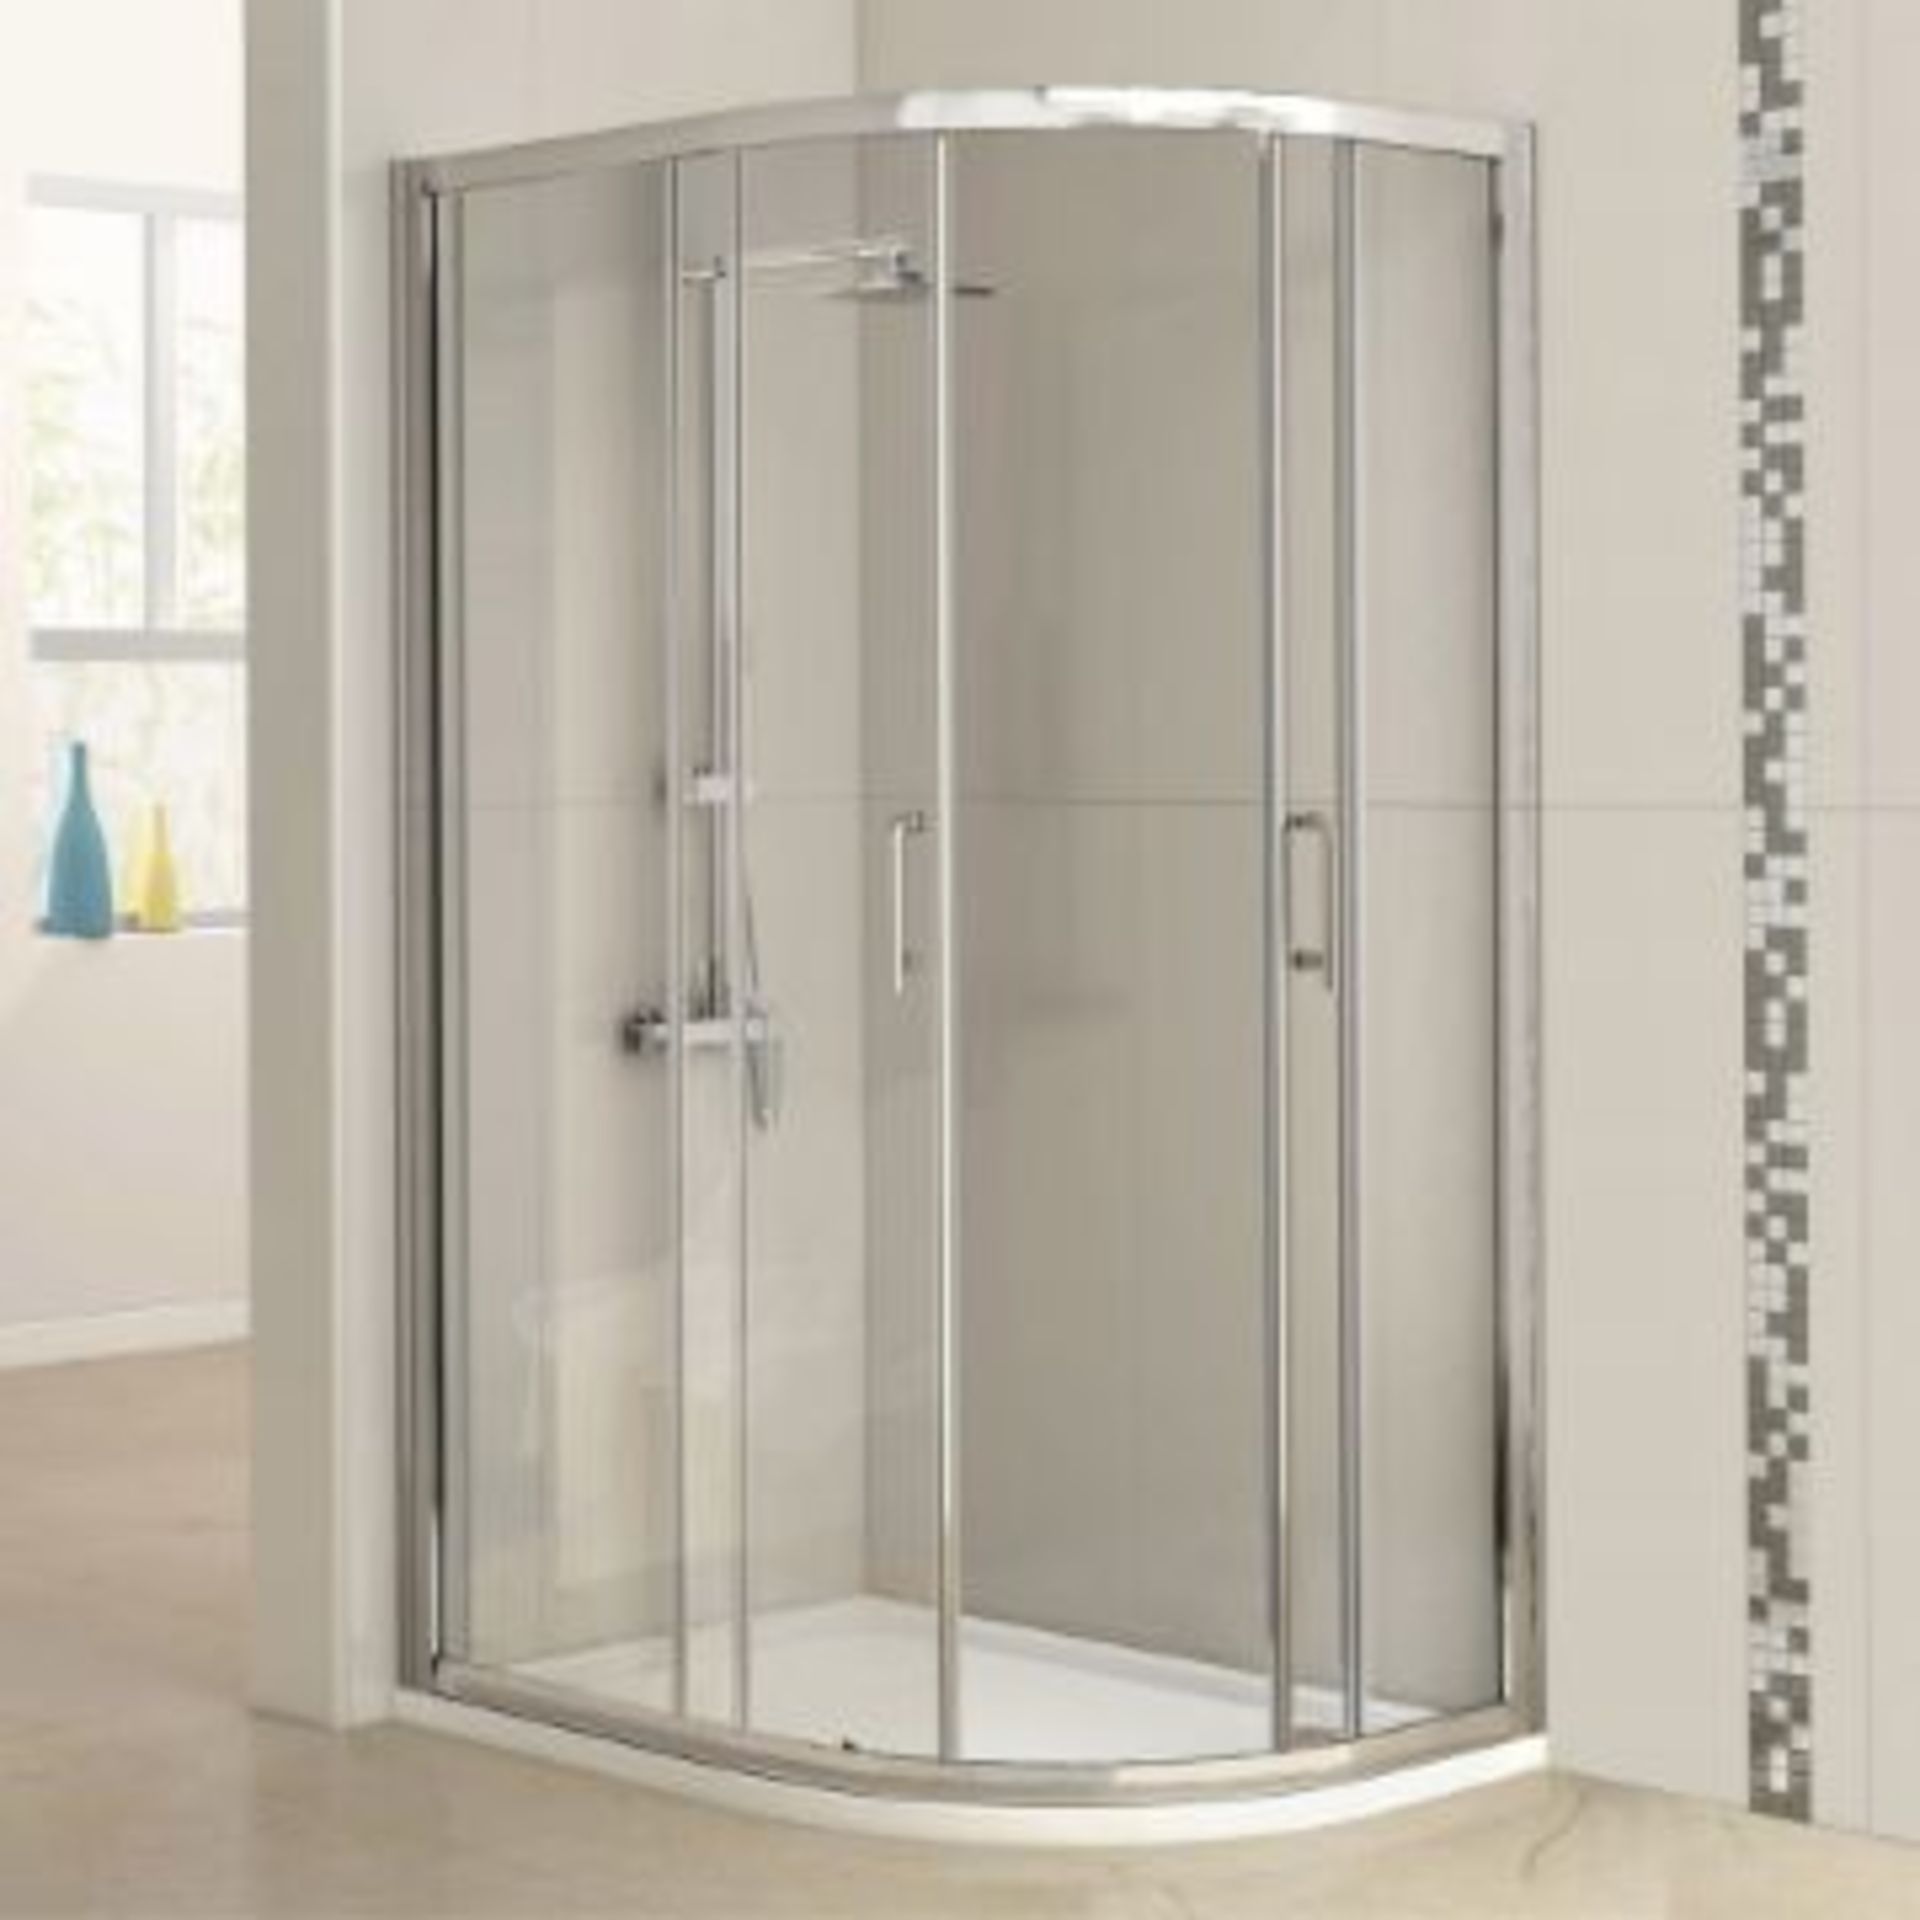 New (T69) The Twyford 1200 x 800mm Offset Quadrant Shower Enclosure Uses The Innovative Click L...